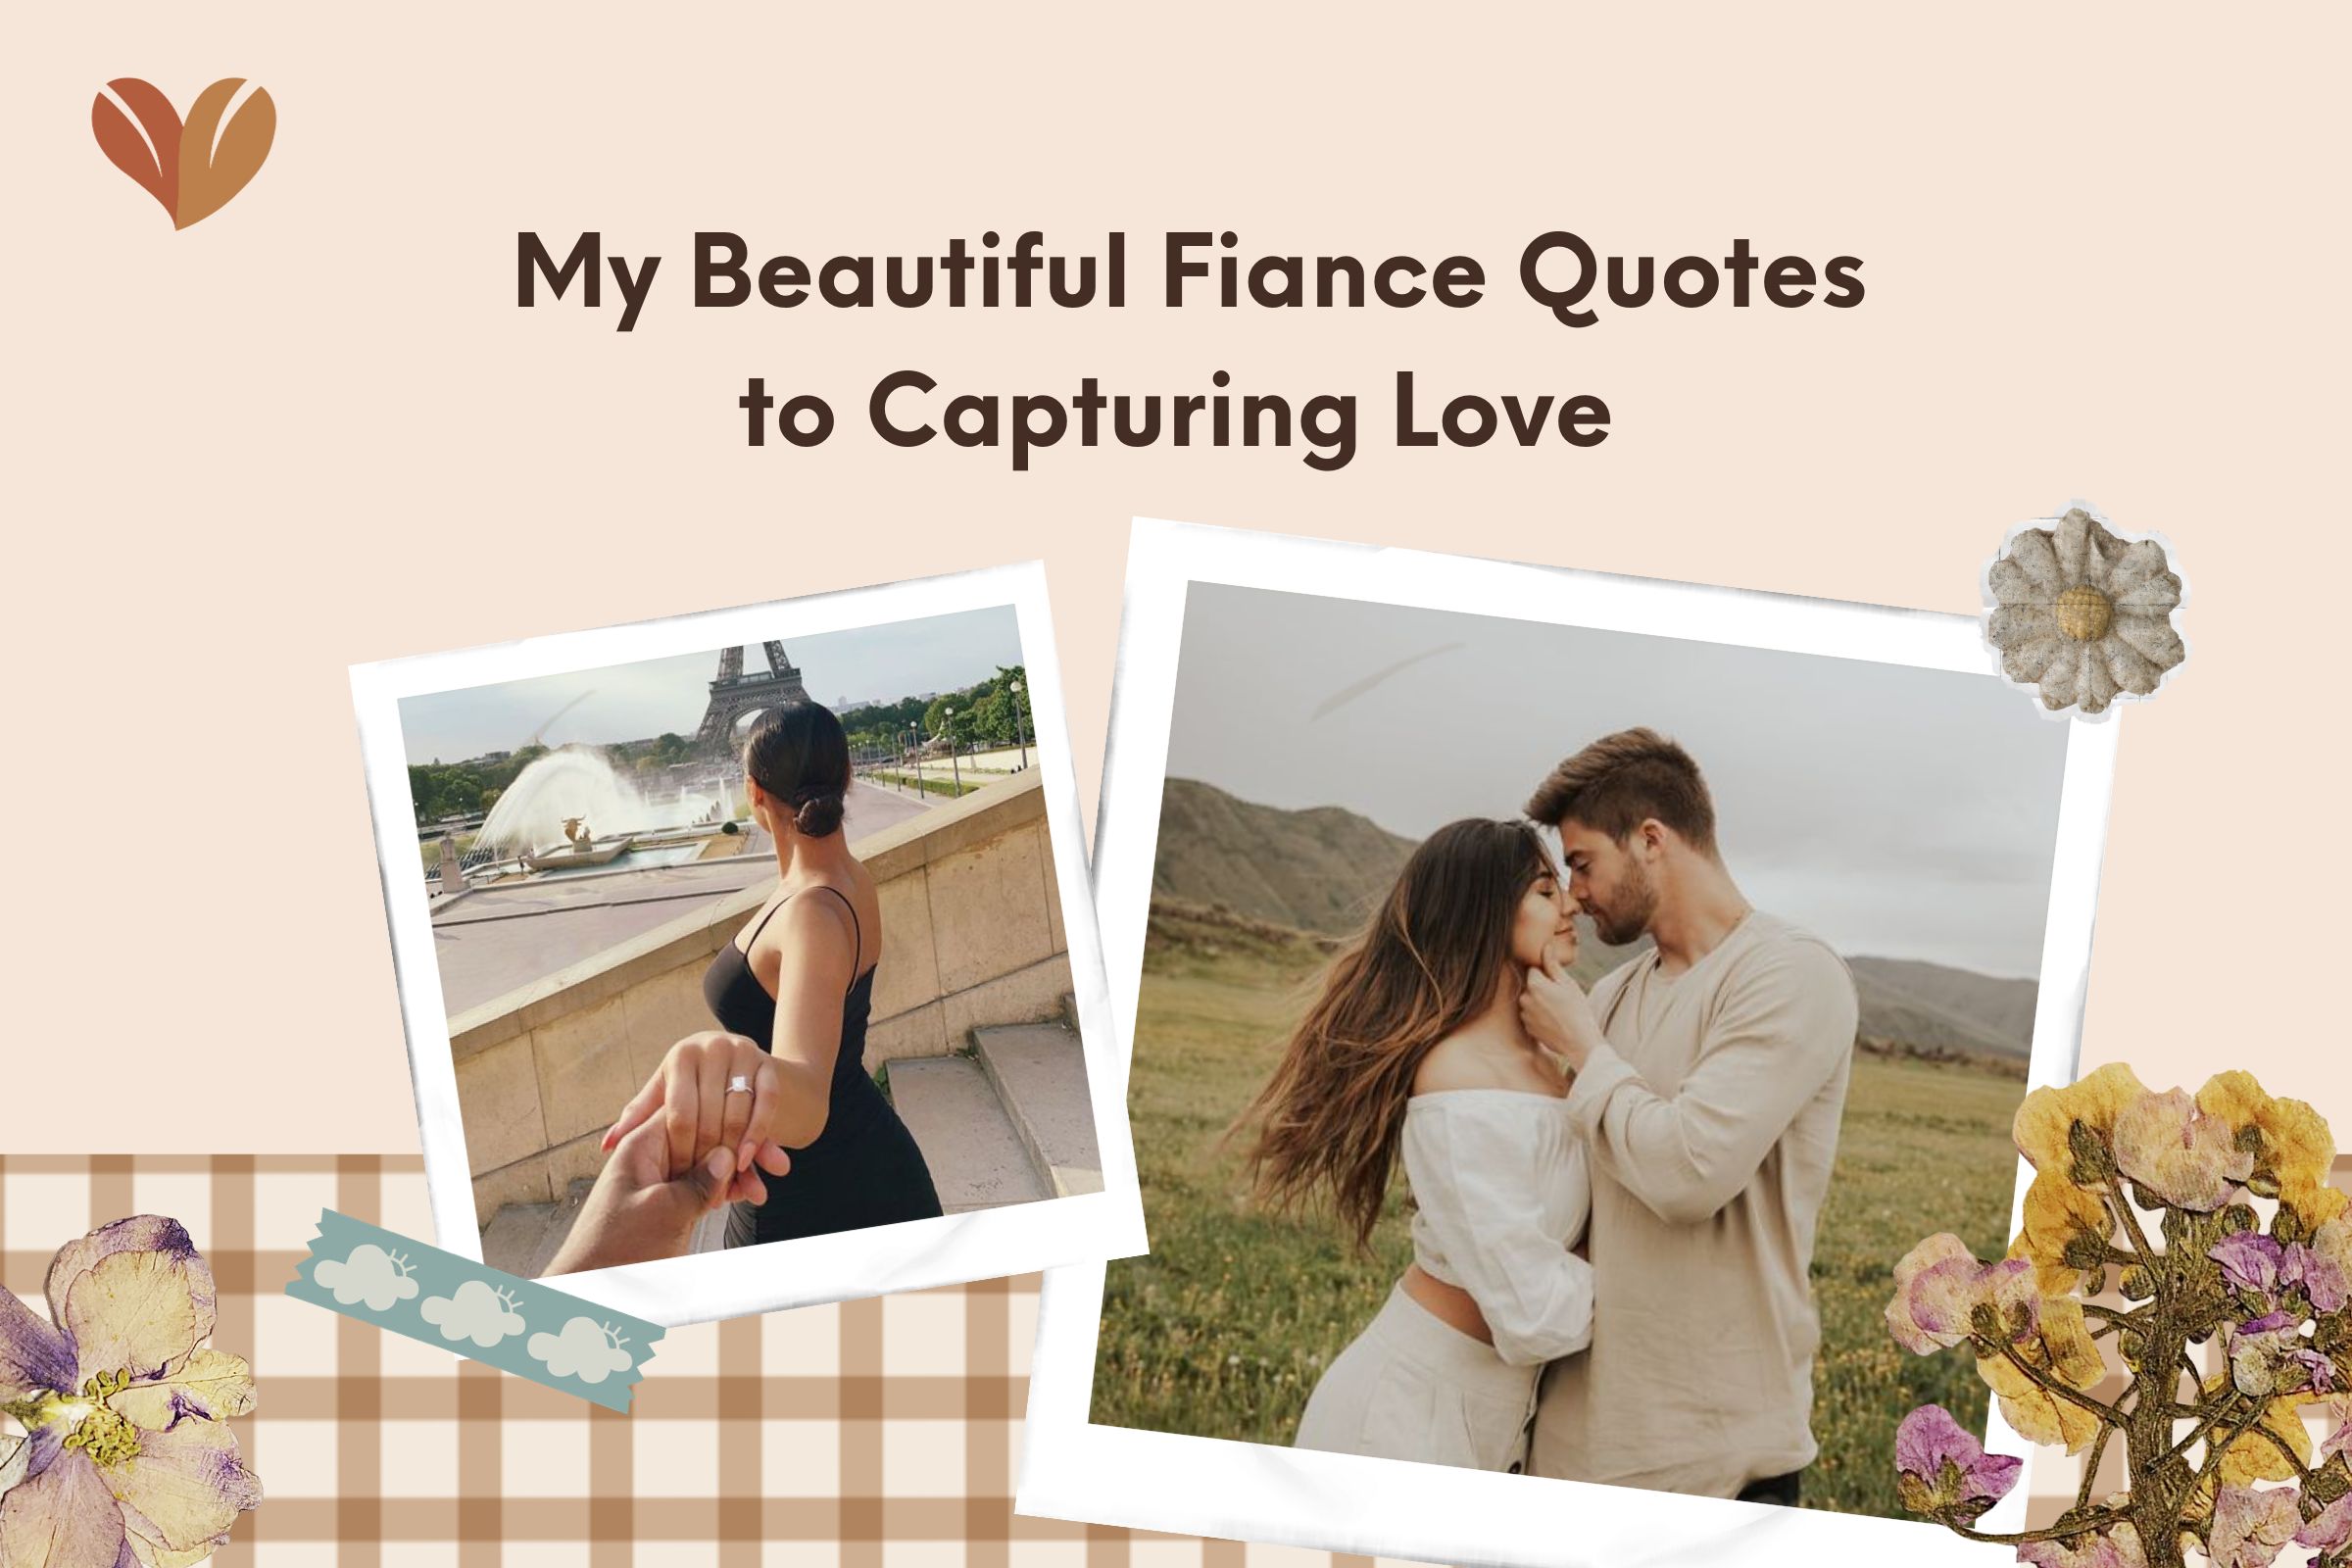 My Beautiful Fiance Quotes to Capturing Love